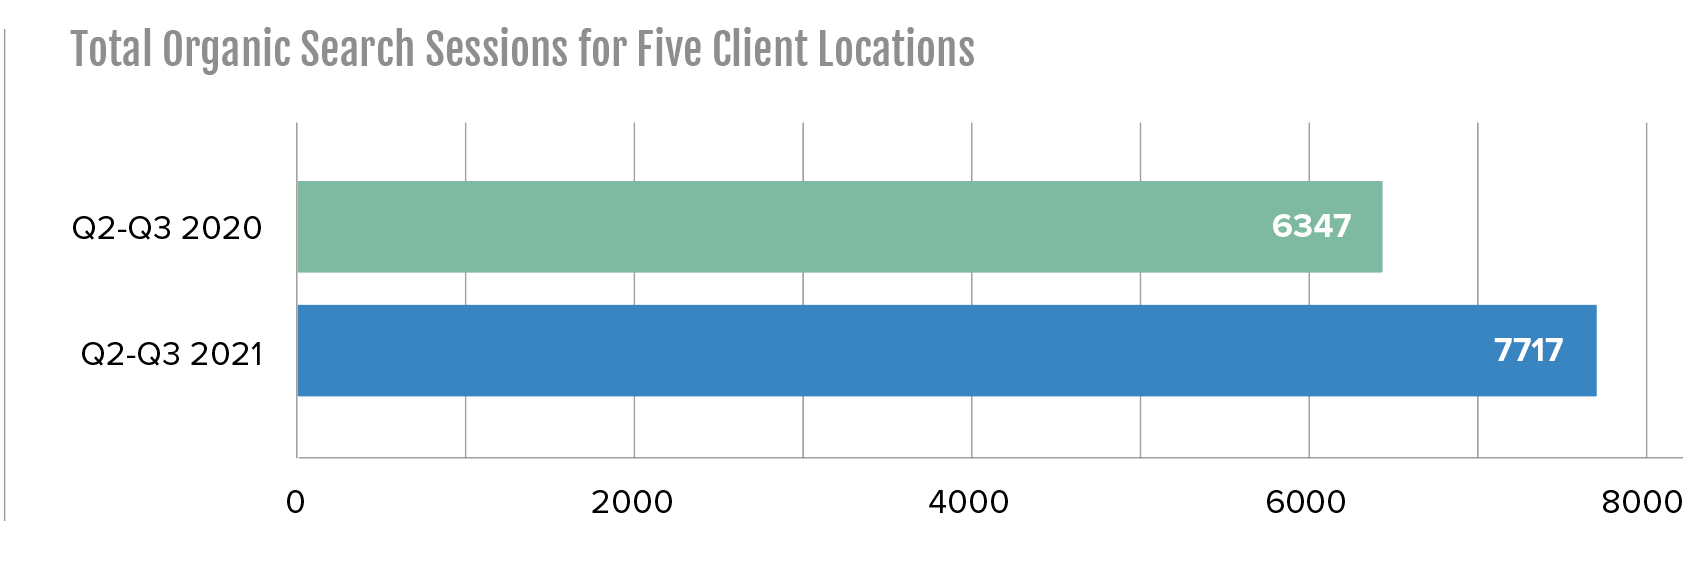 total organic search sessions for five client locations